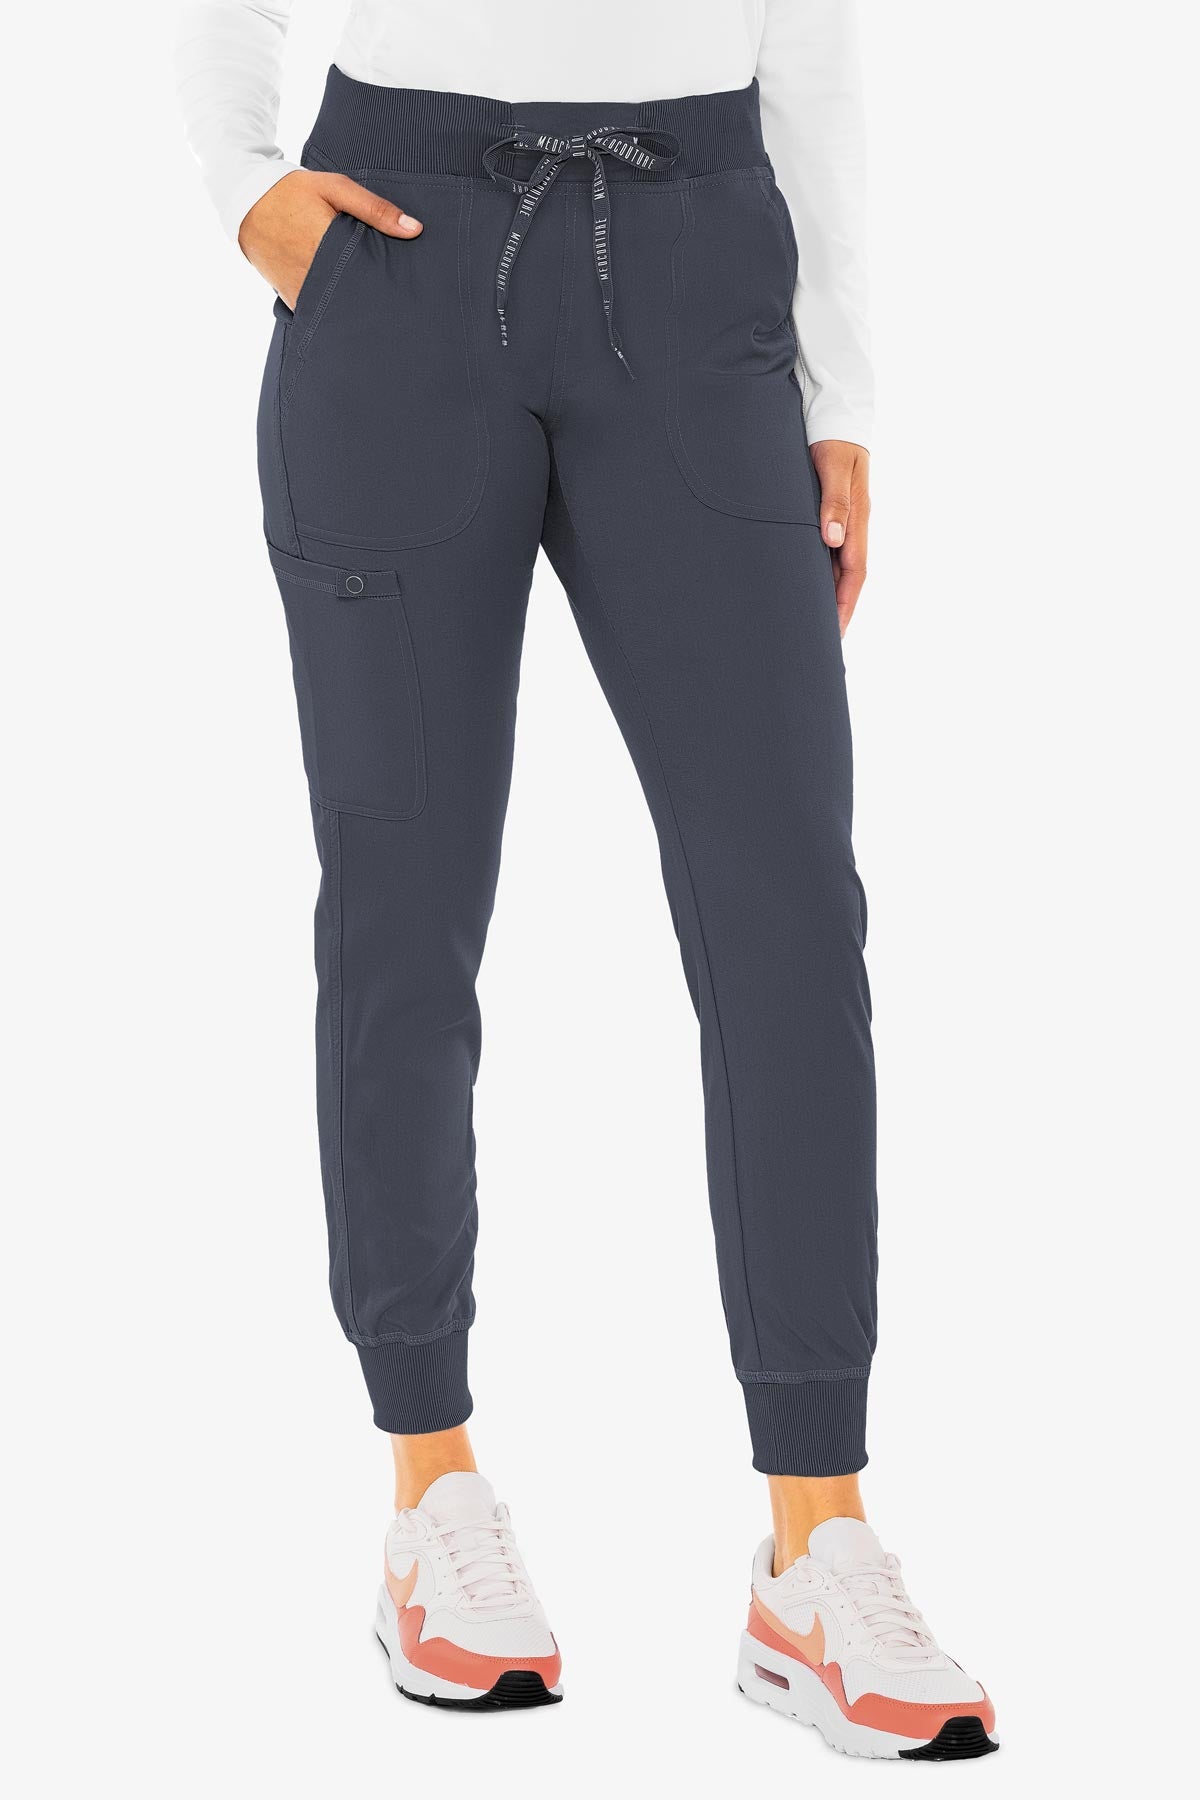 *Touch Jogger Yoga Pant | 7710